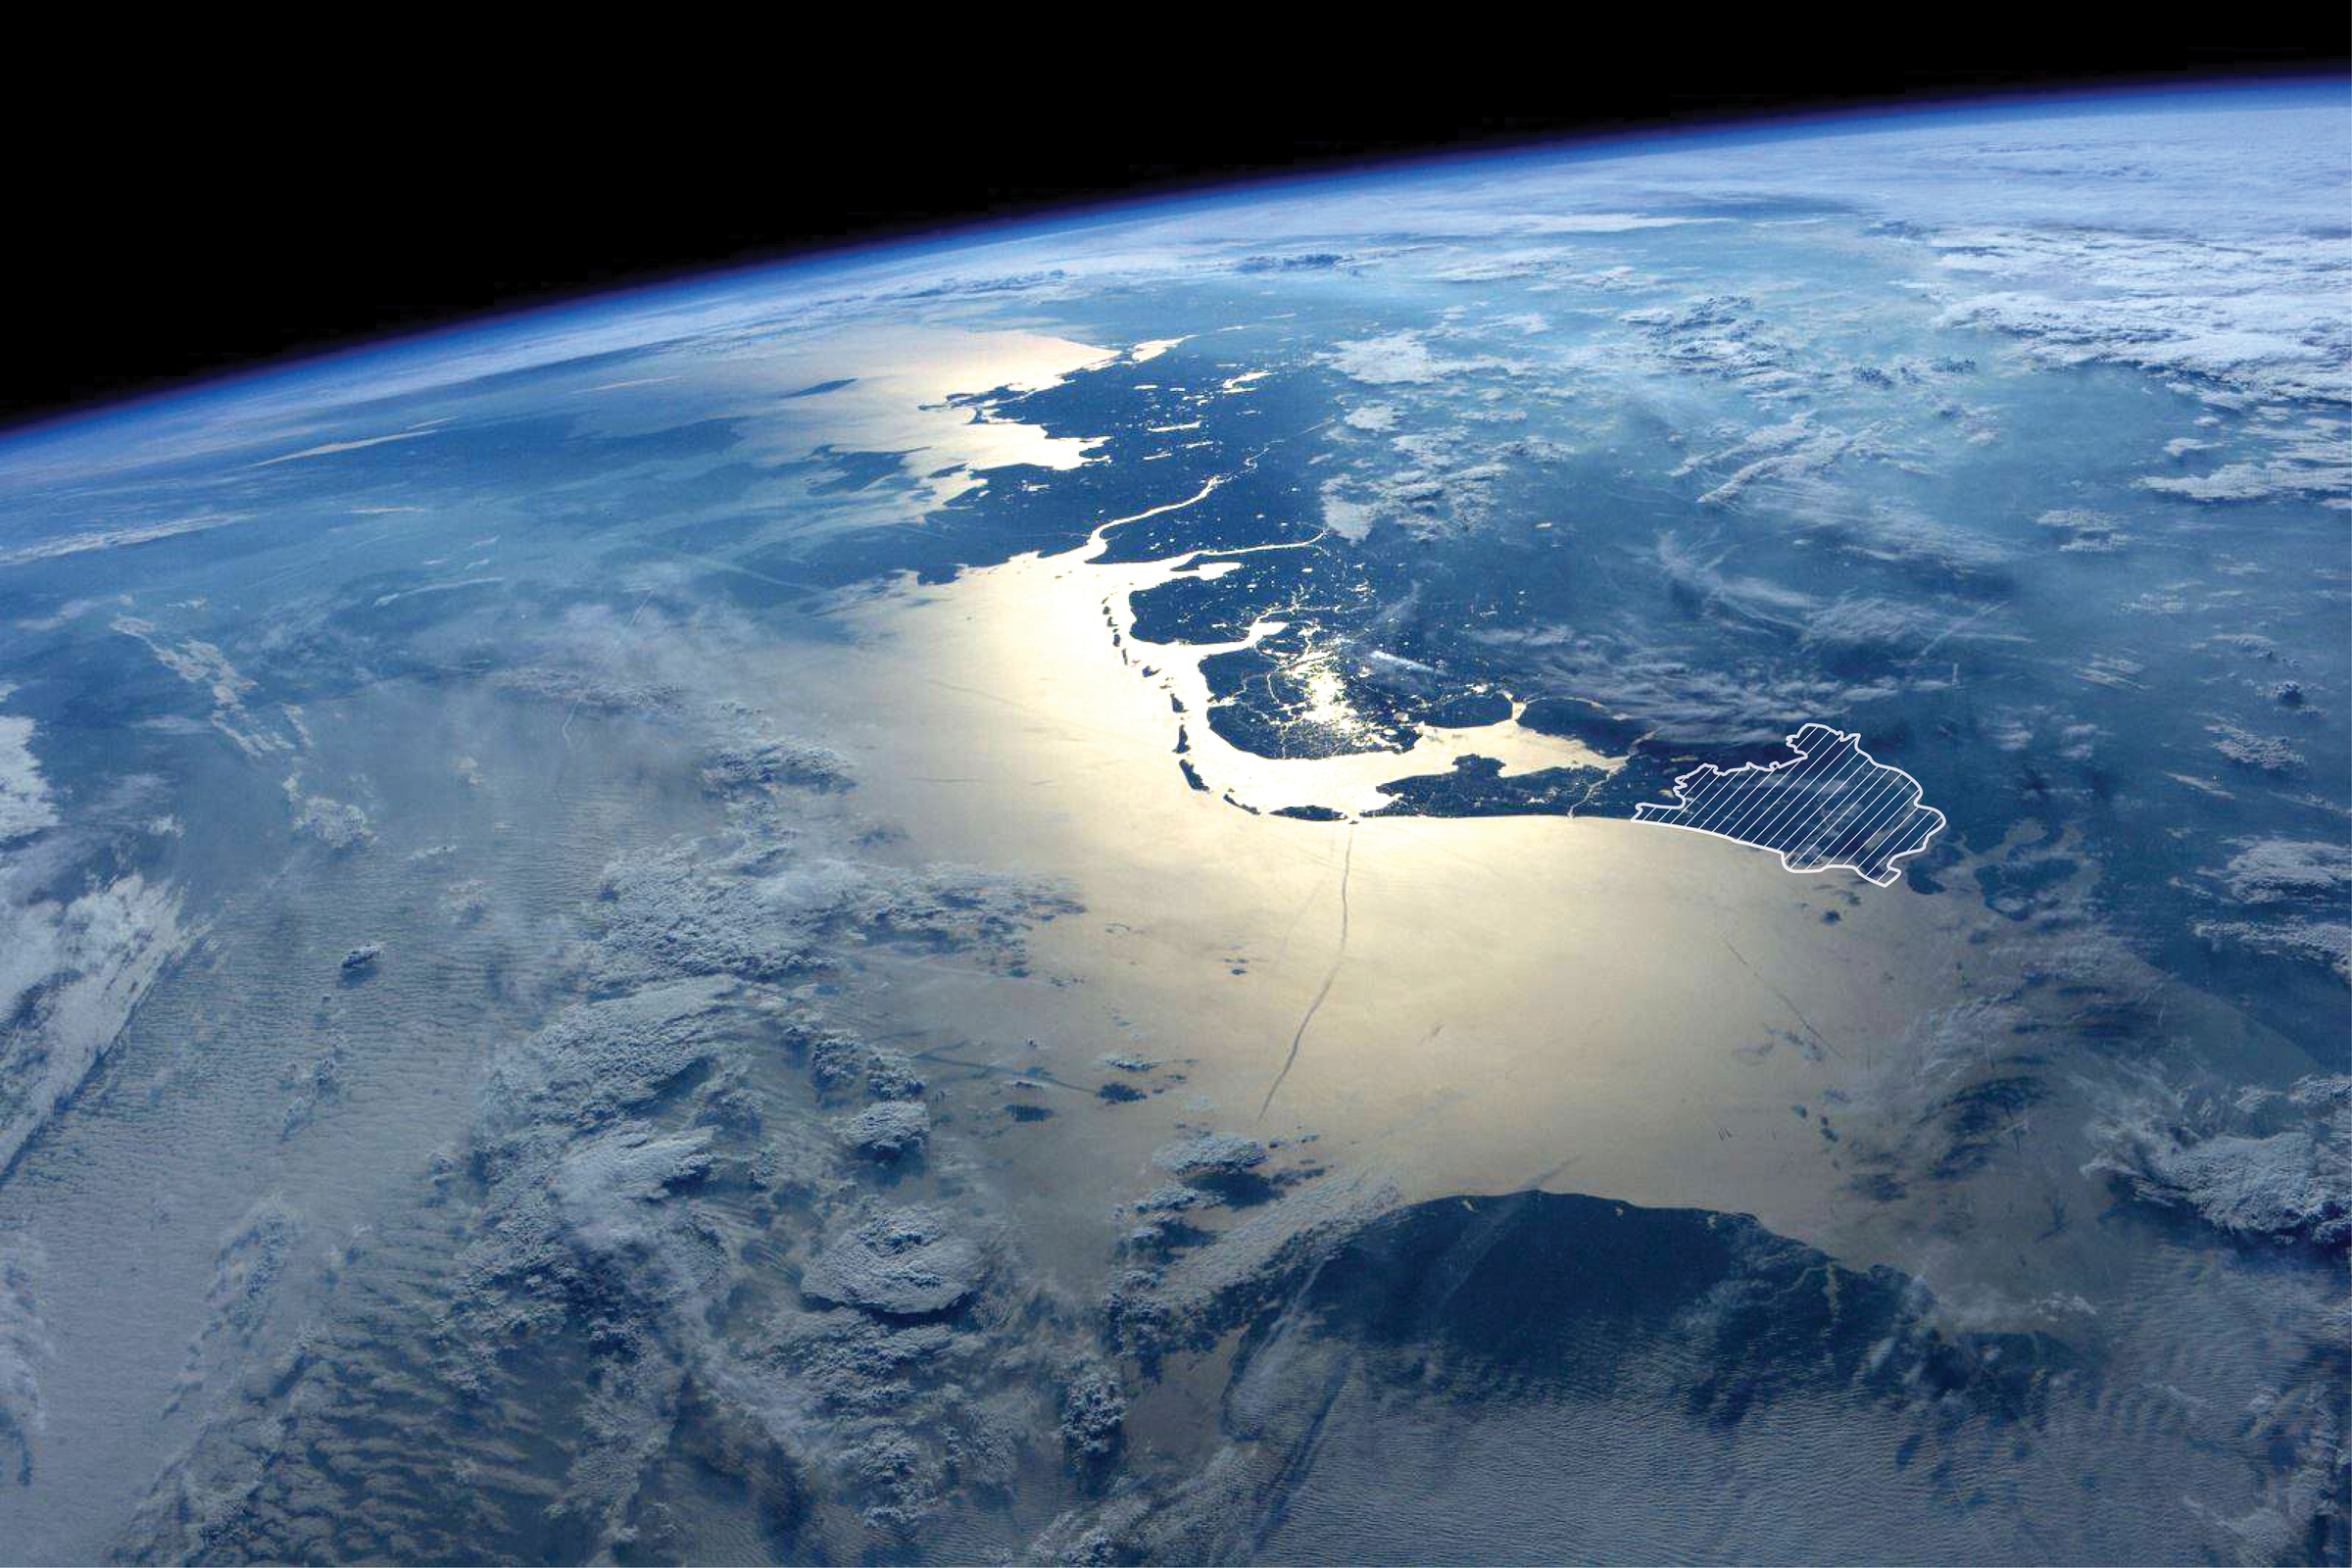 Western Europe and the Netherlands from space station ISS. © NASA